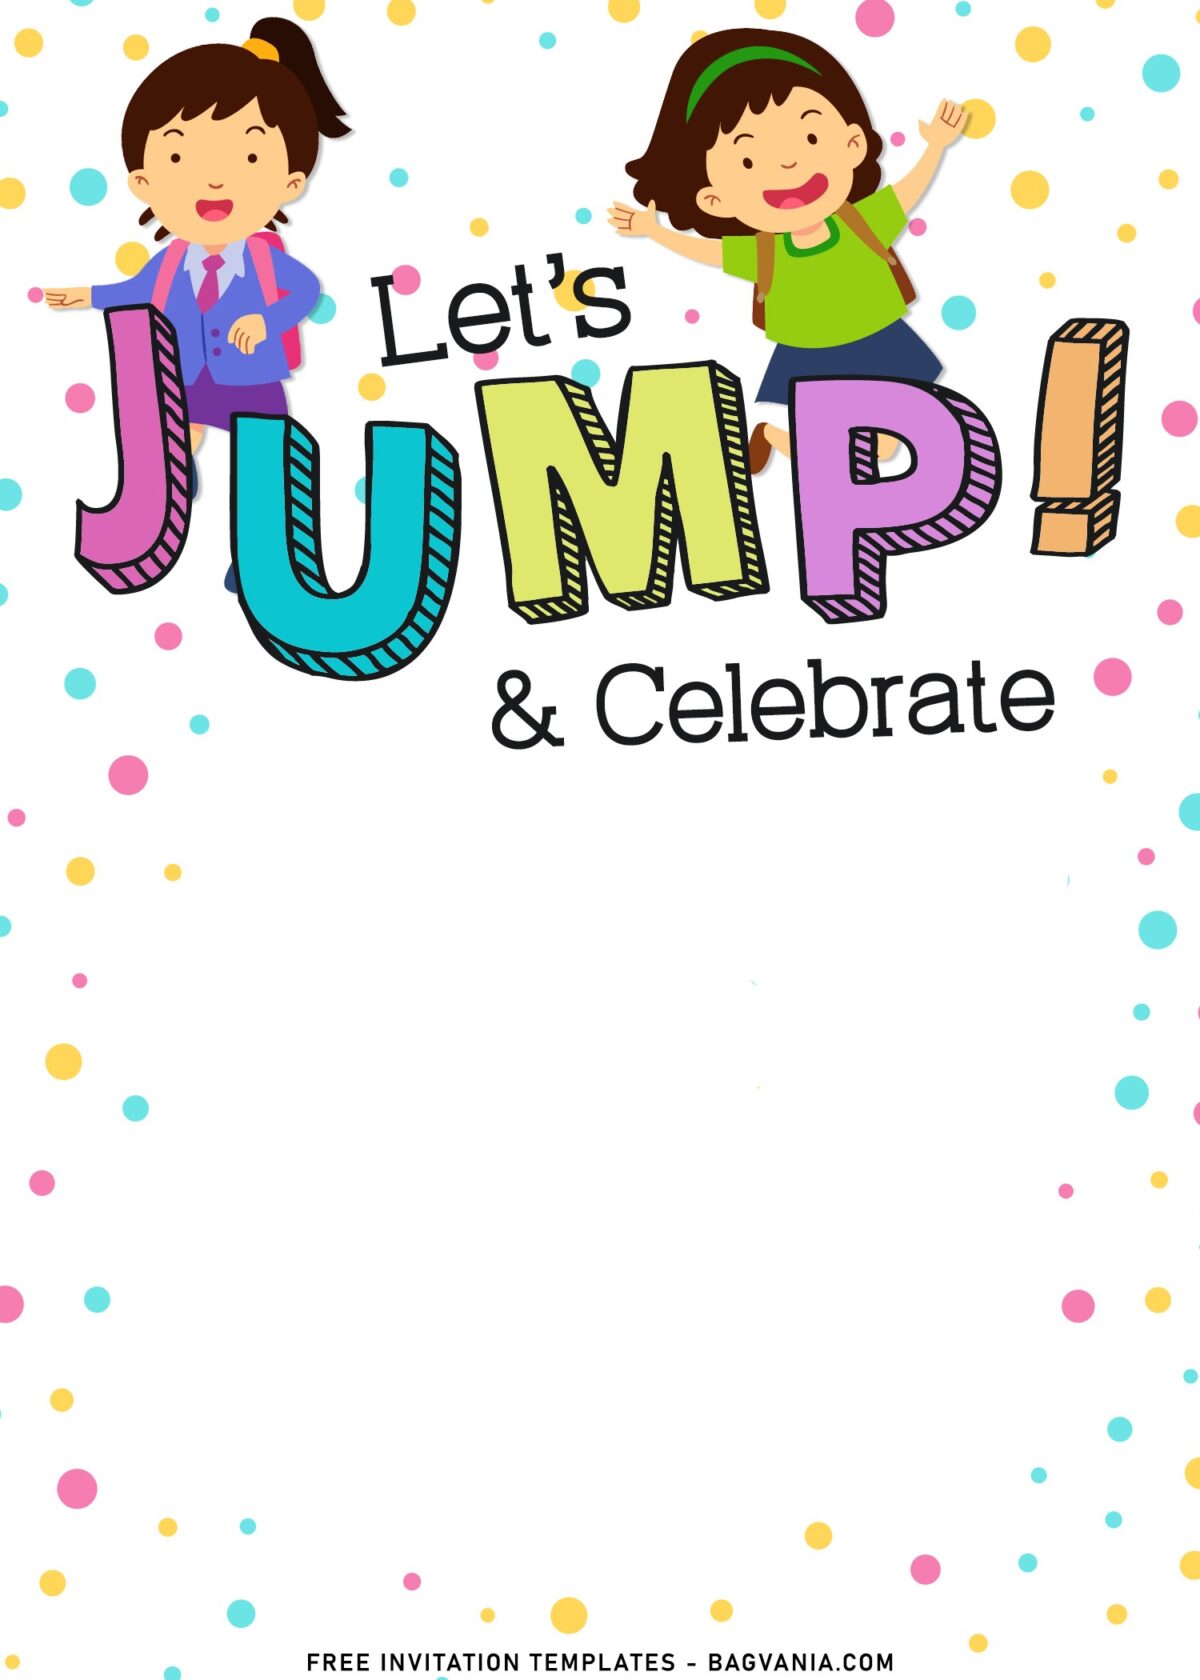 11+ Let’s Jump Party Invitation Templates For Your Kids Next Bash with happy kids